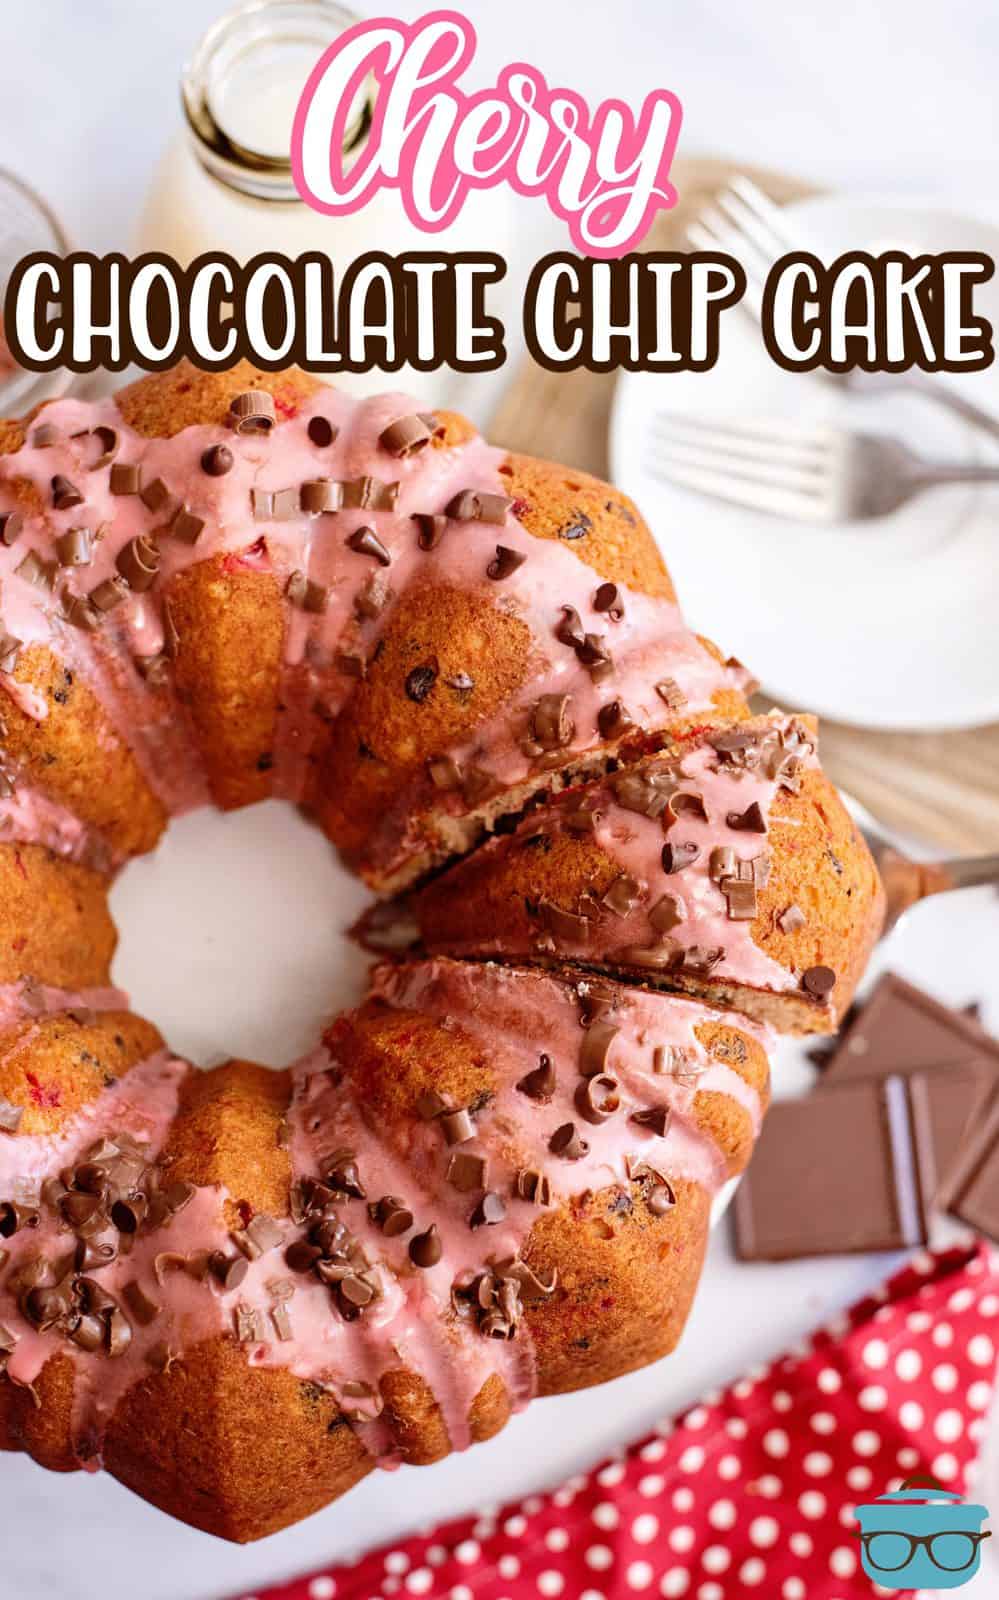 Overhead of full Cherry Chocolate Chip Cake with one piece cut Pinterest image.